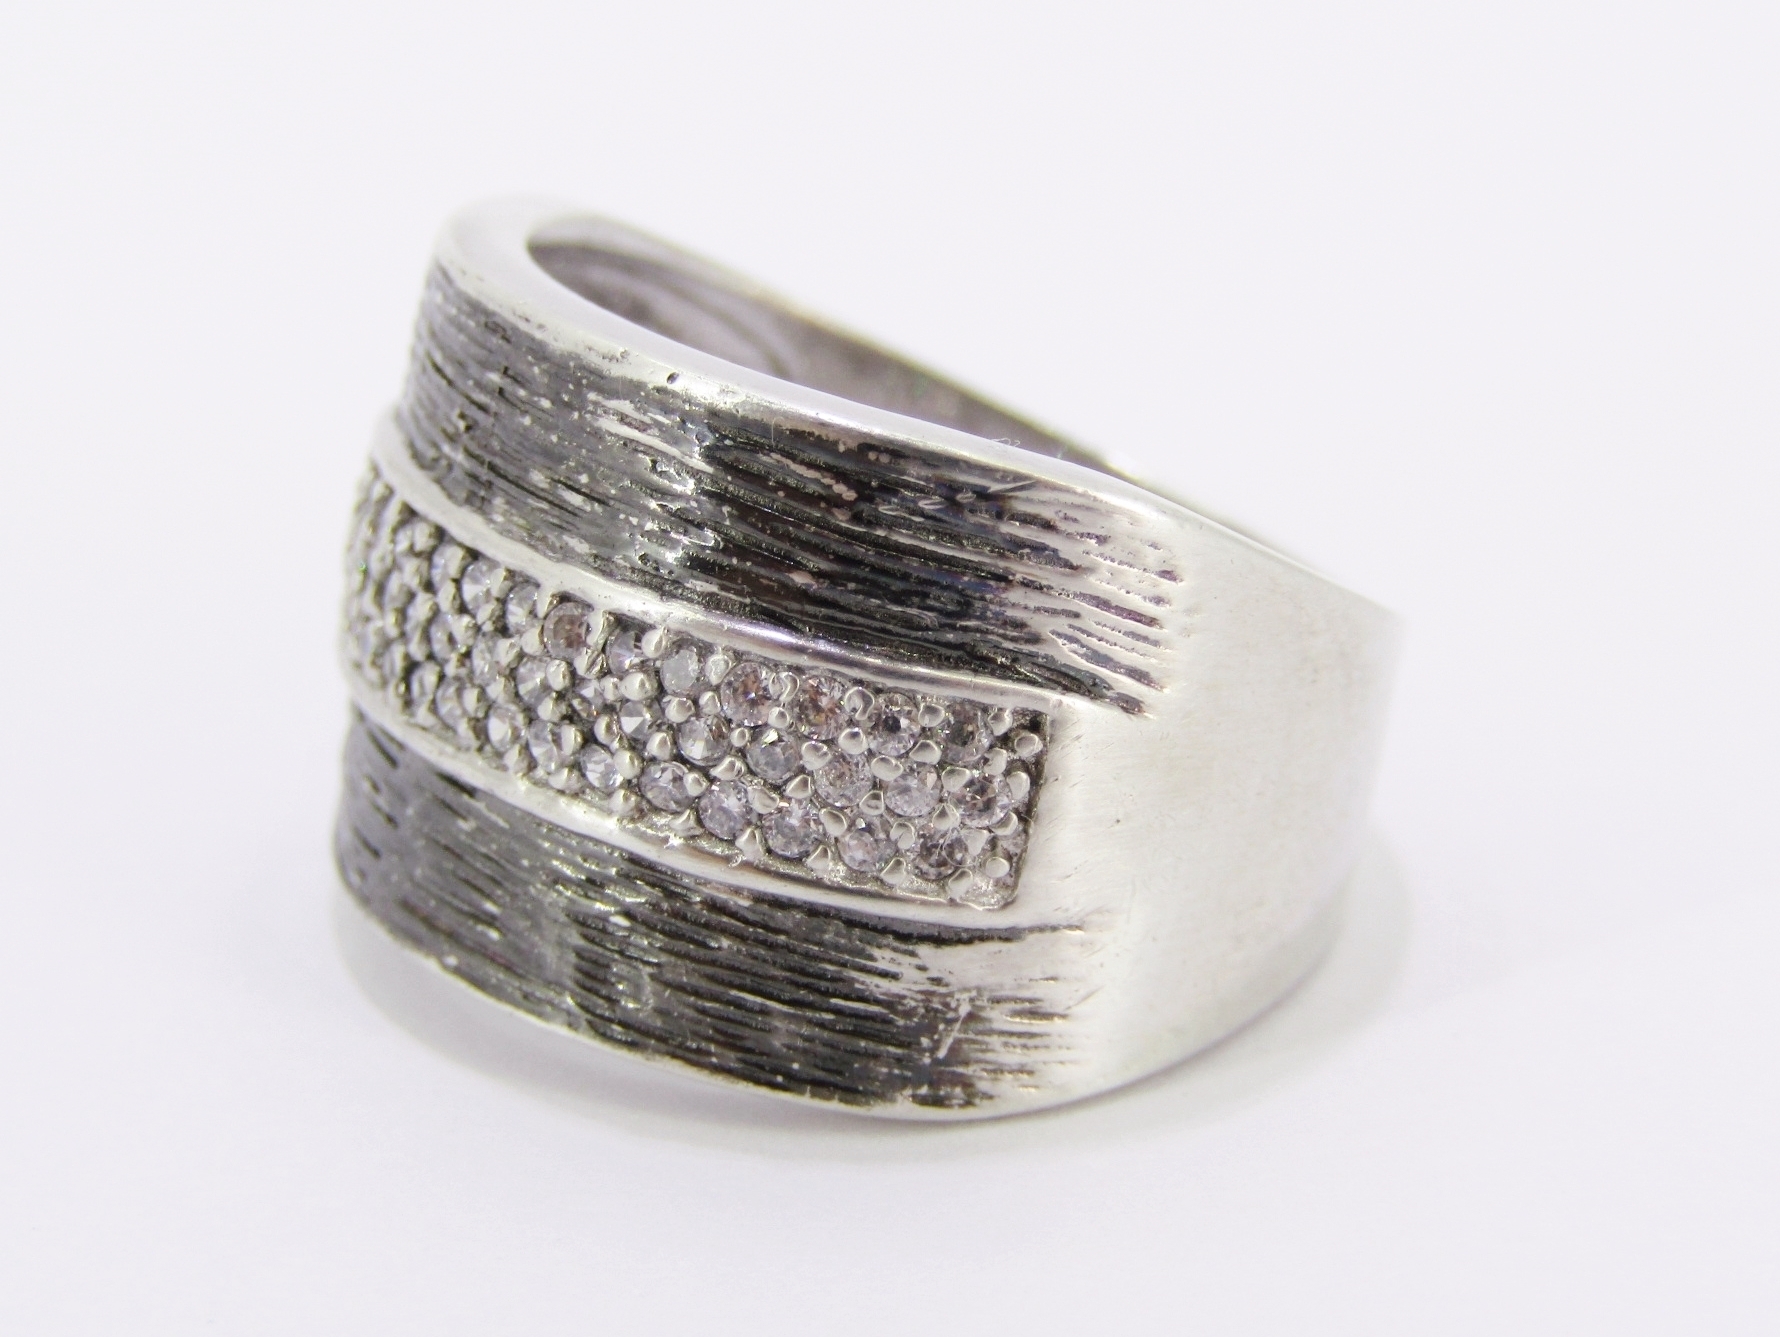 A Stunning Broad Textured Ring With Zirconia’s in Sterling Silver.